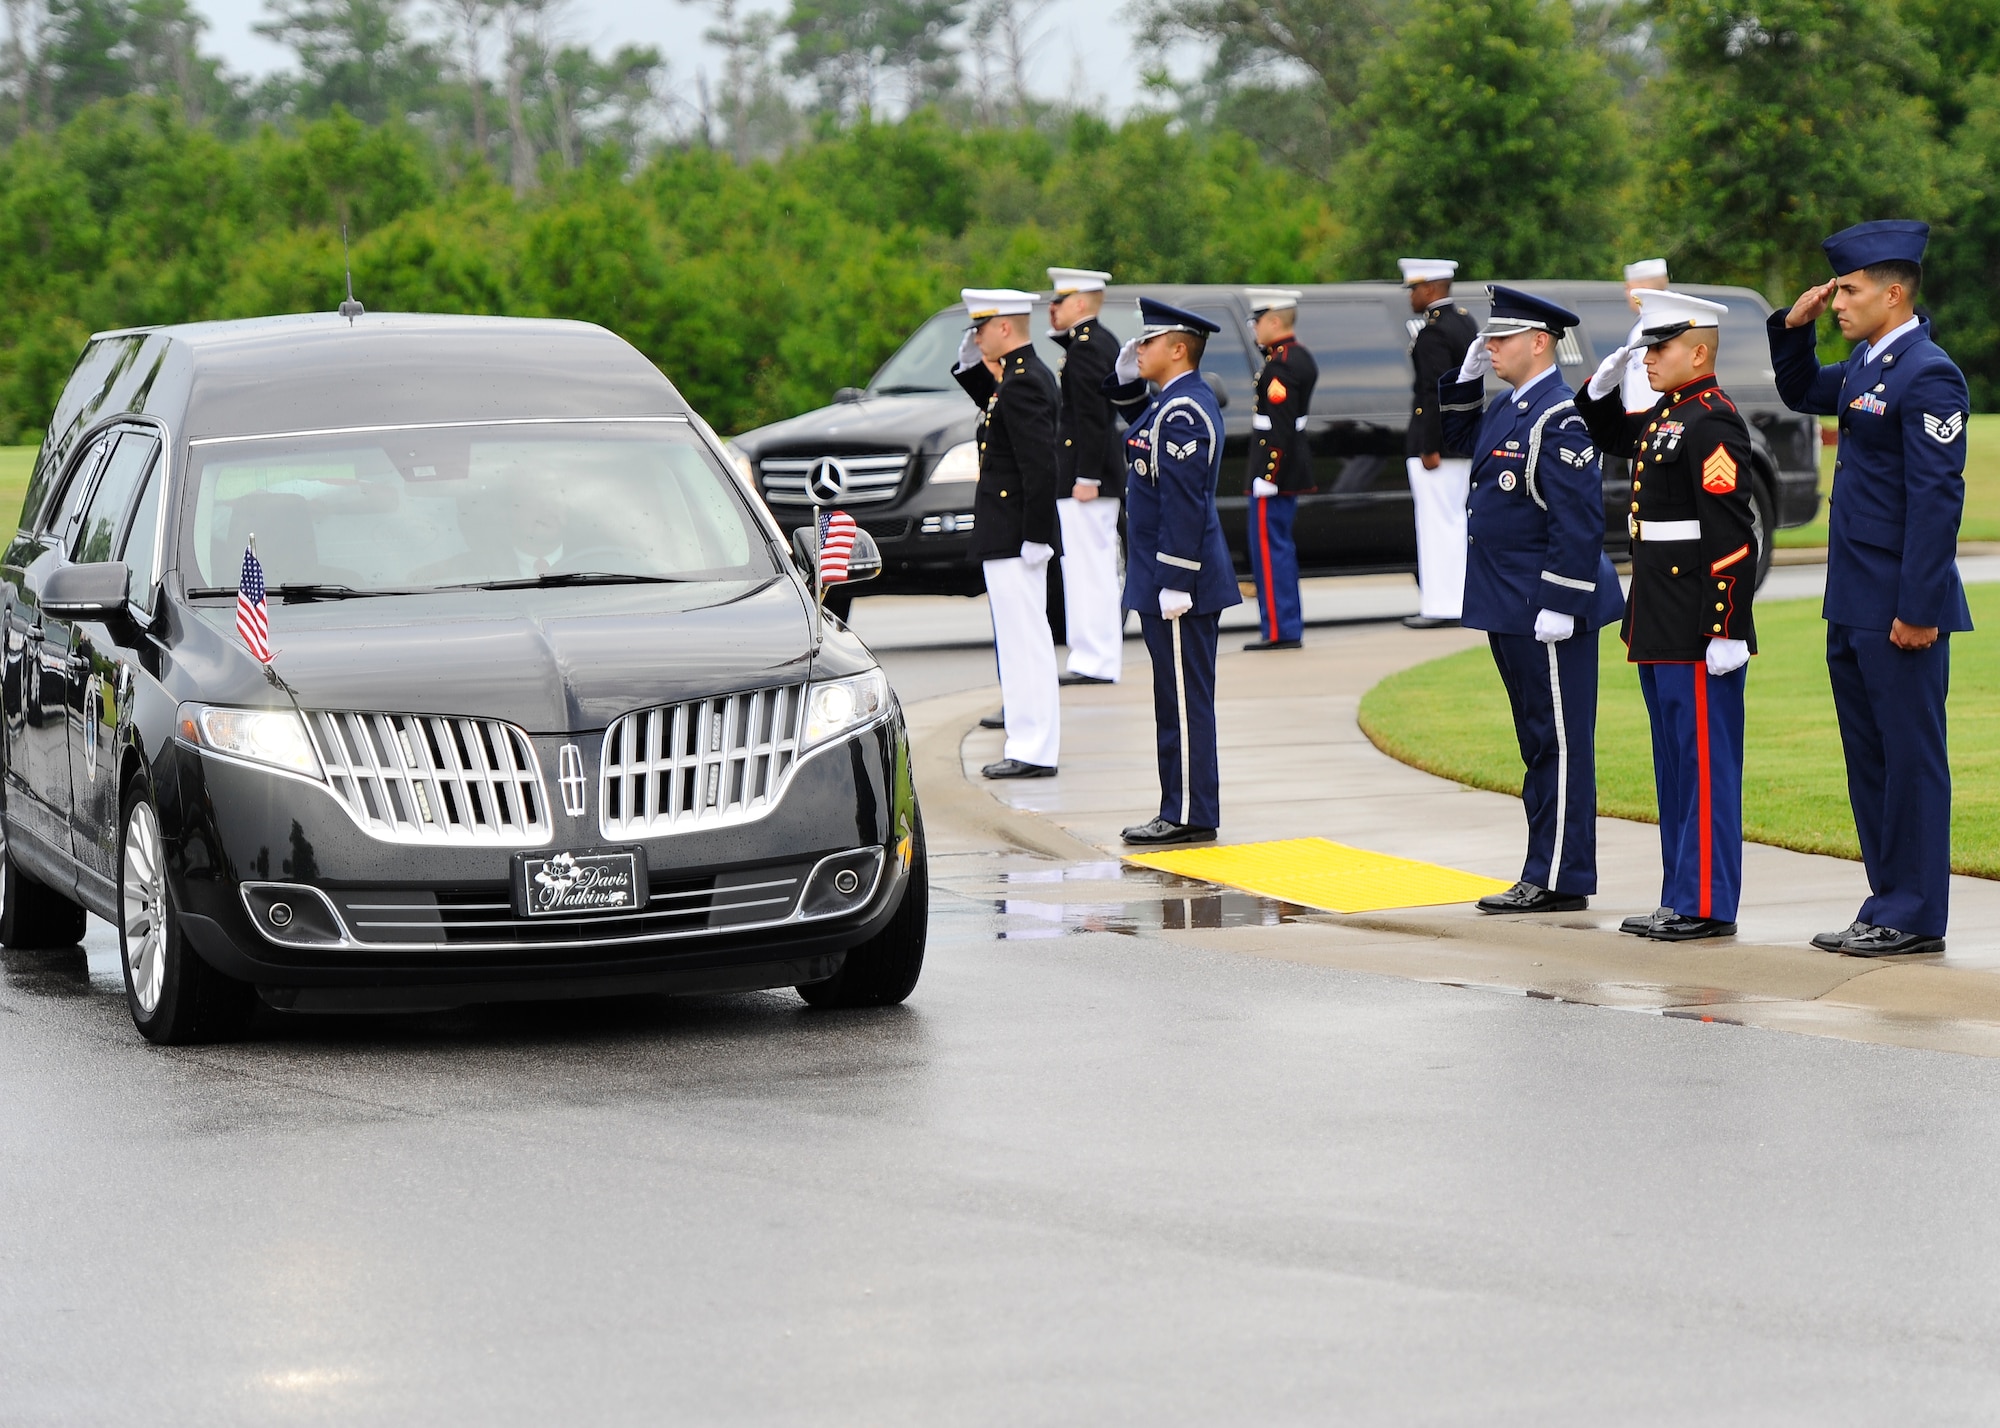 U.S. service members salute retired U.S. Air Force Col. George “Bud” Day’s hearse as it arrives to Barrancas National Cemetery on Naval Air Station Pensacola, Fla., Aug. 1, 2013. Day, a Medal of Honor recipient and combat pilot with service in World War II, Korea and Vietnam, passed away July 28 at the age of 88. (U.S. Air Force Photo/ Airman 1st Class Jeffrey Parkinson)